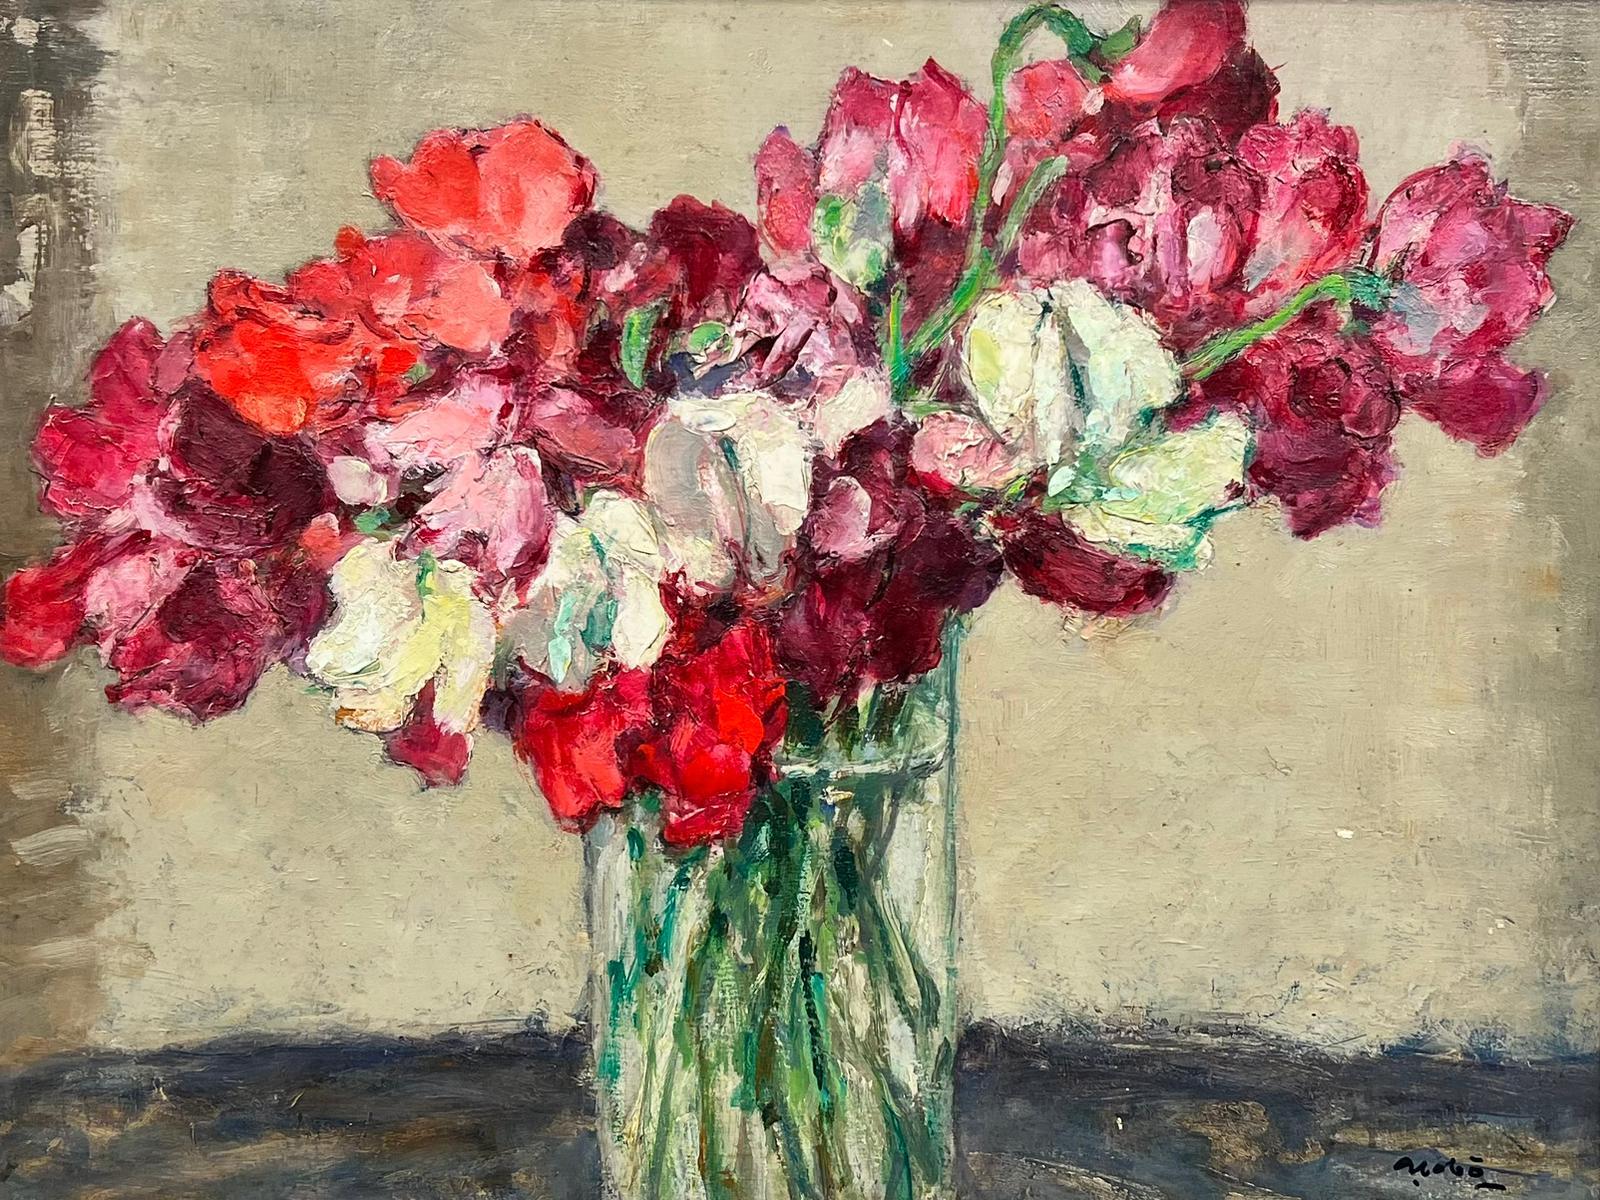 Artist/ School: French School, mid 20th century, signed and inscribed verso

Title: Still life of pink, white and red flowers in a glass vase. Painted with delightful texture and thick oil paint. 

Medium: oil on board, framed

Framed: 17 x 20